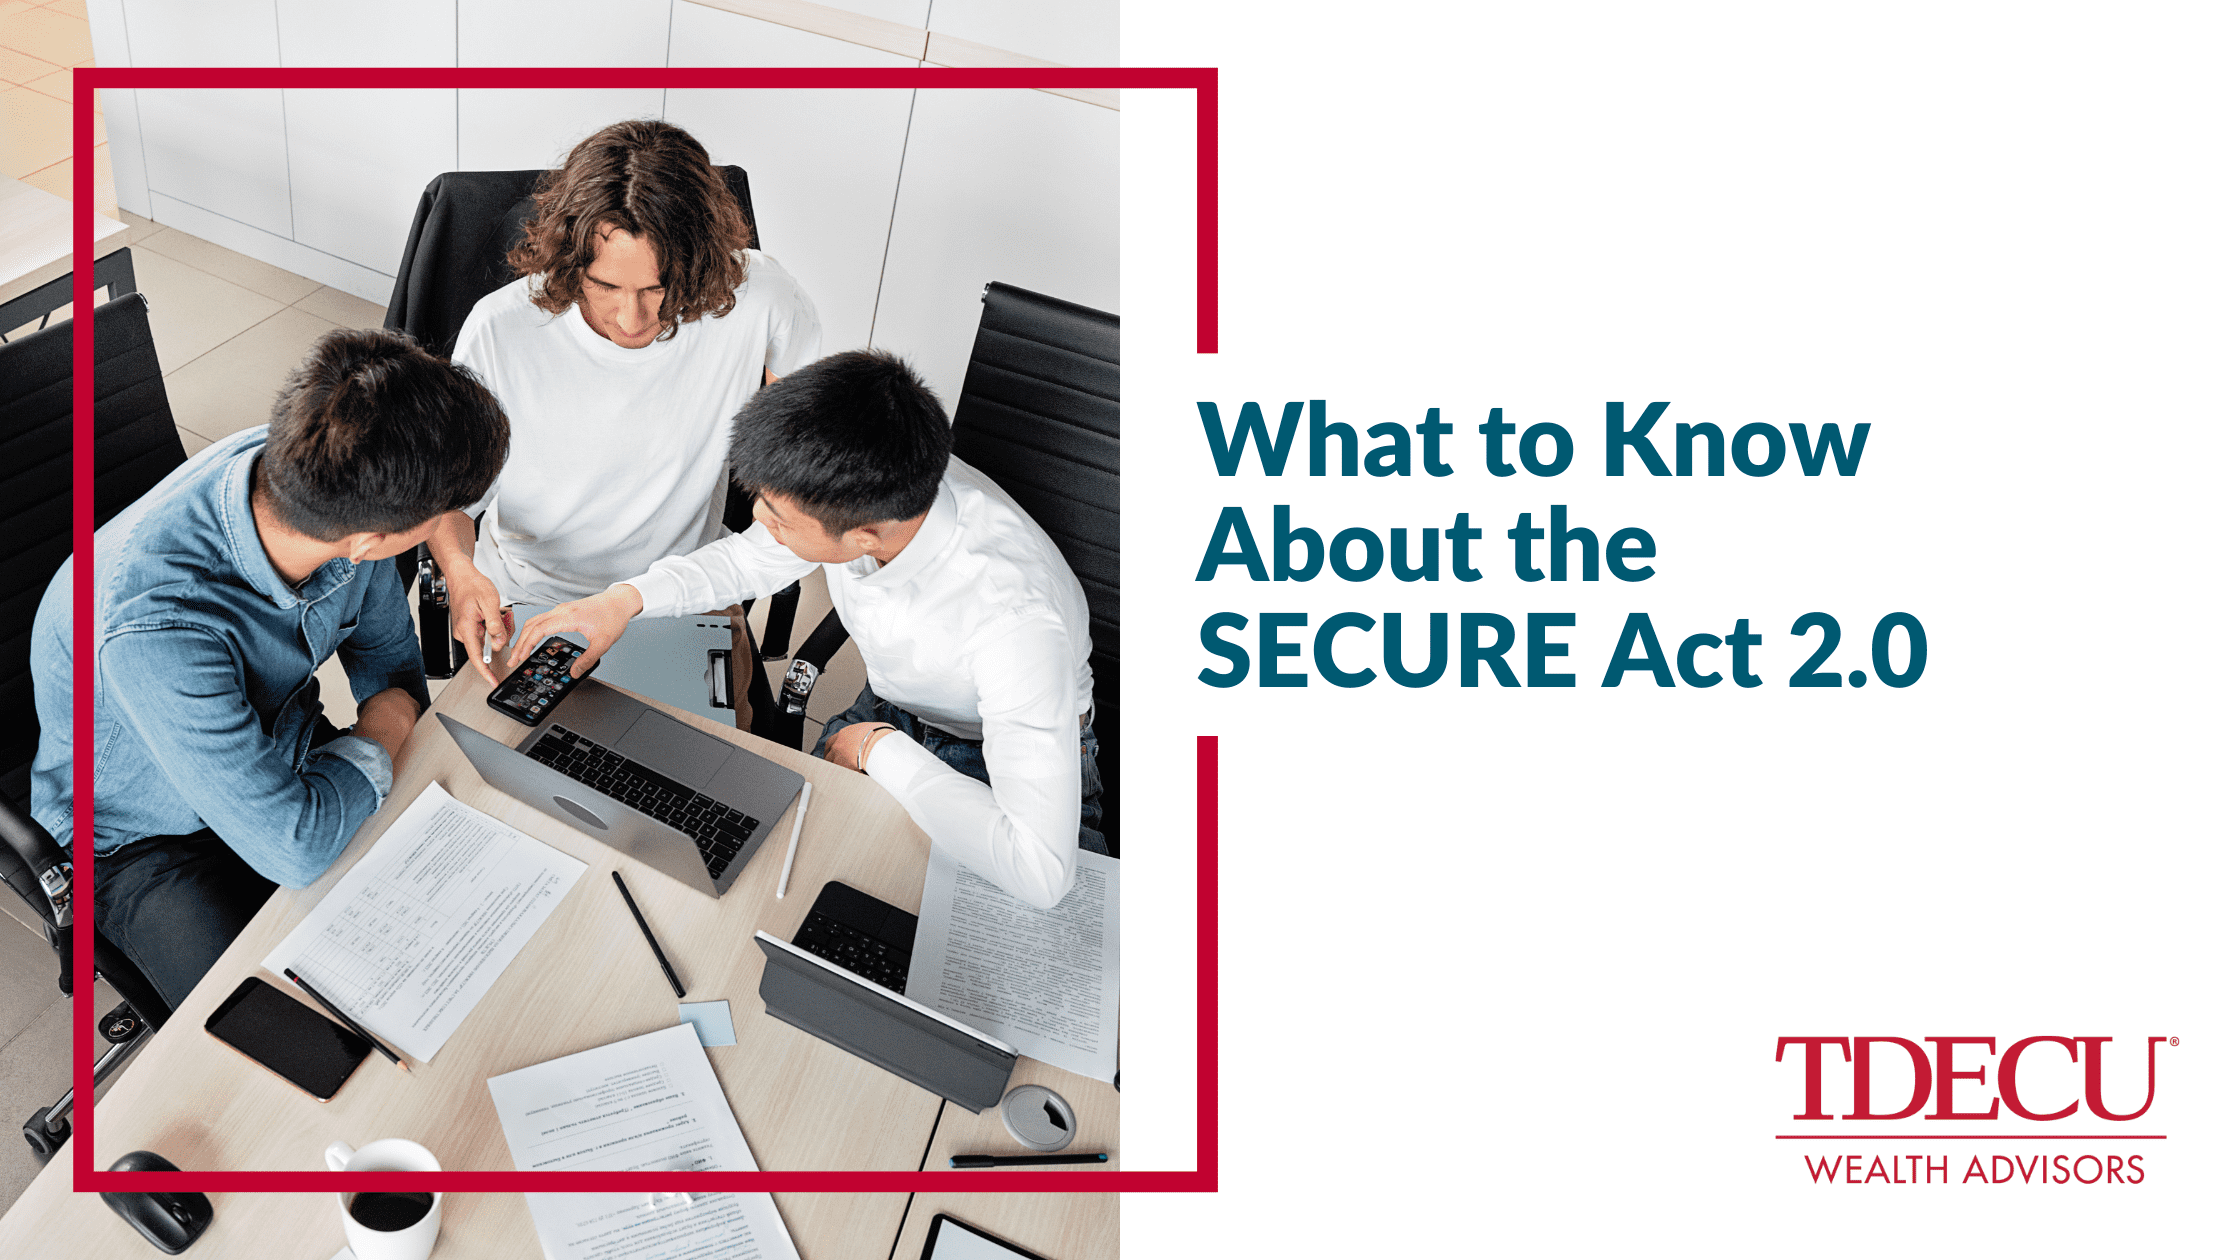 What to Know About the SECURE Act 2.0